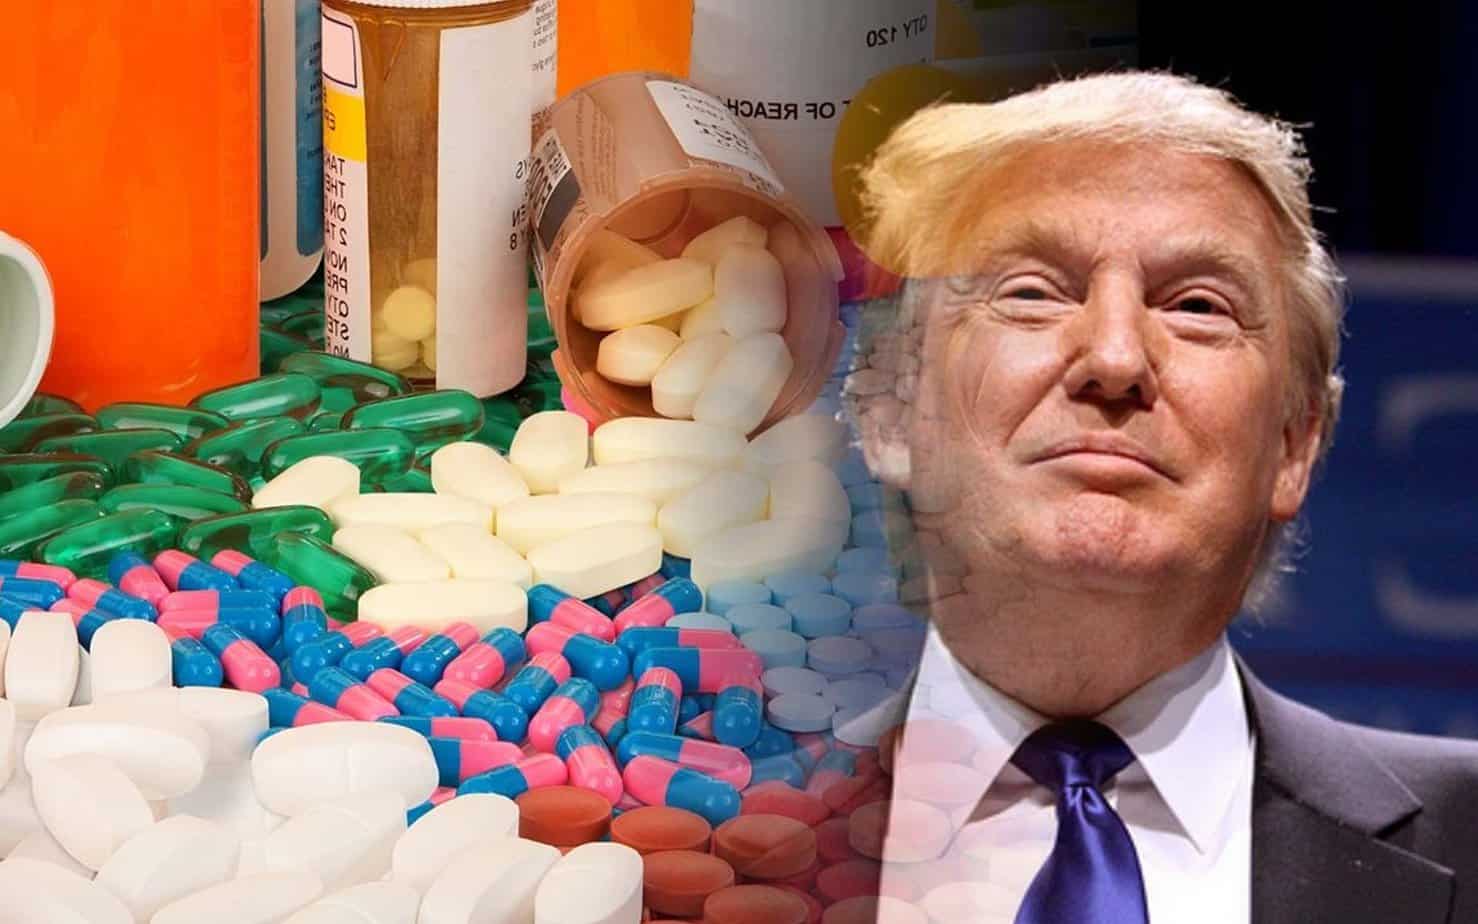 TRUMP ENLISTS BIG PHARMA - Concerns are raised whether he should